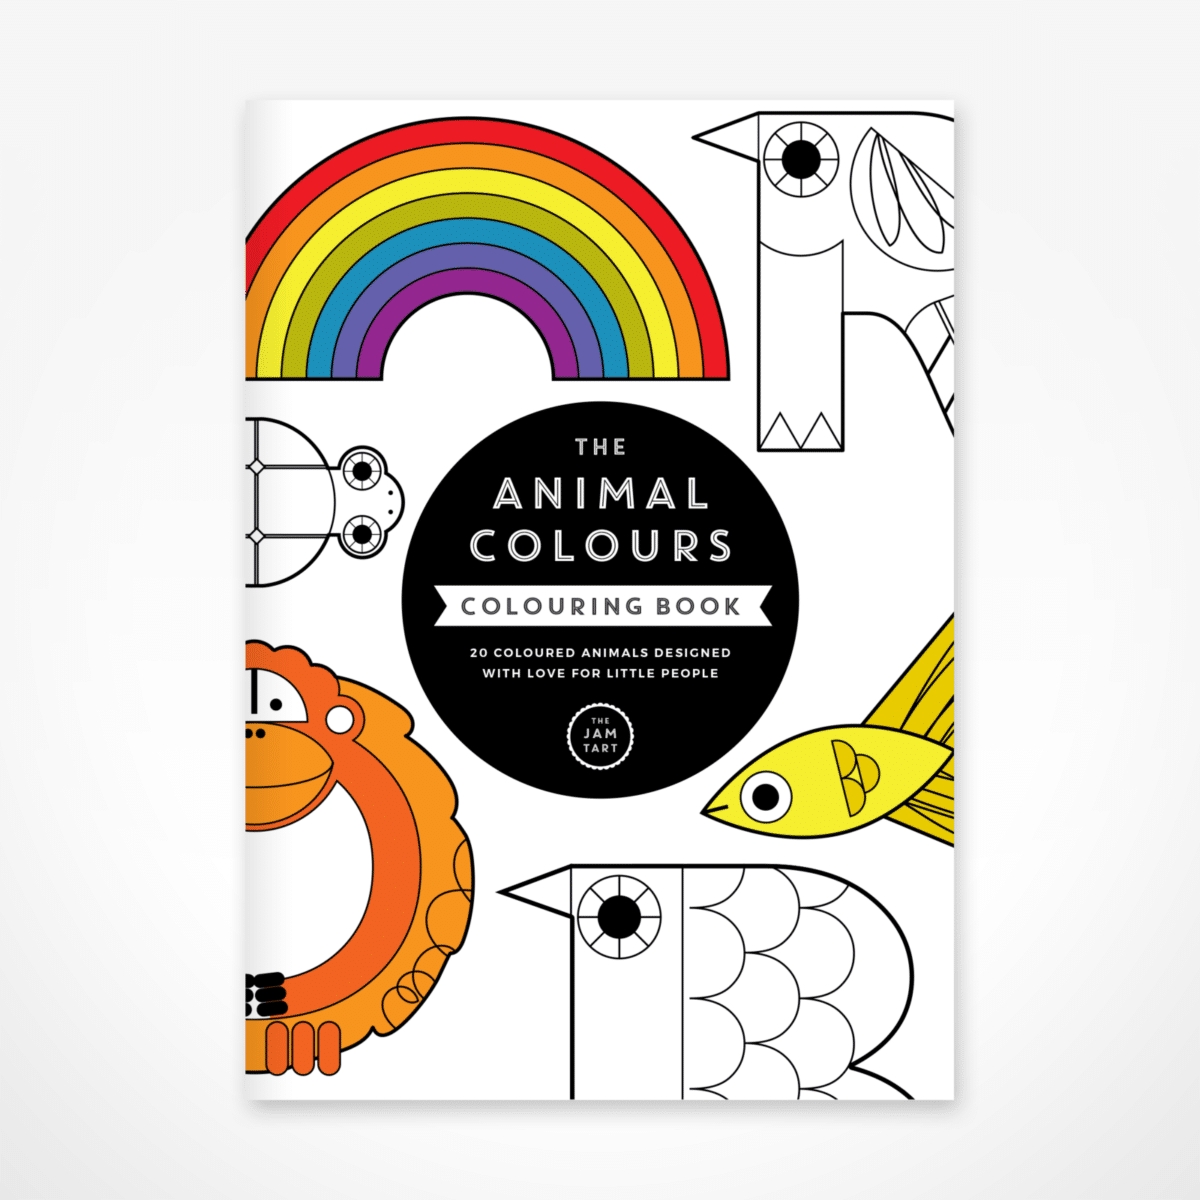 The Animal Colours Colouring Book by The Jam Tart 